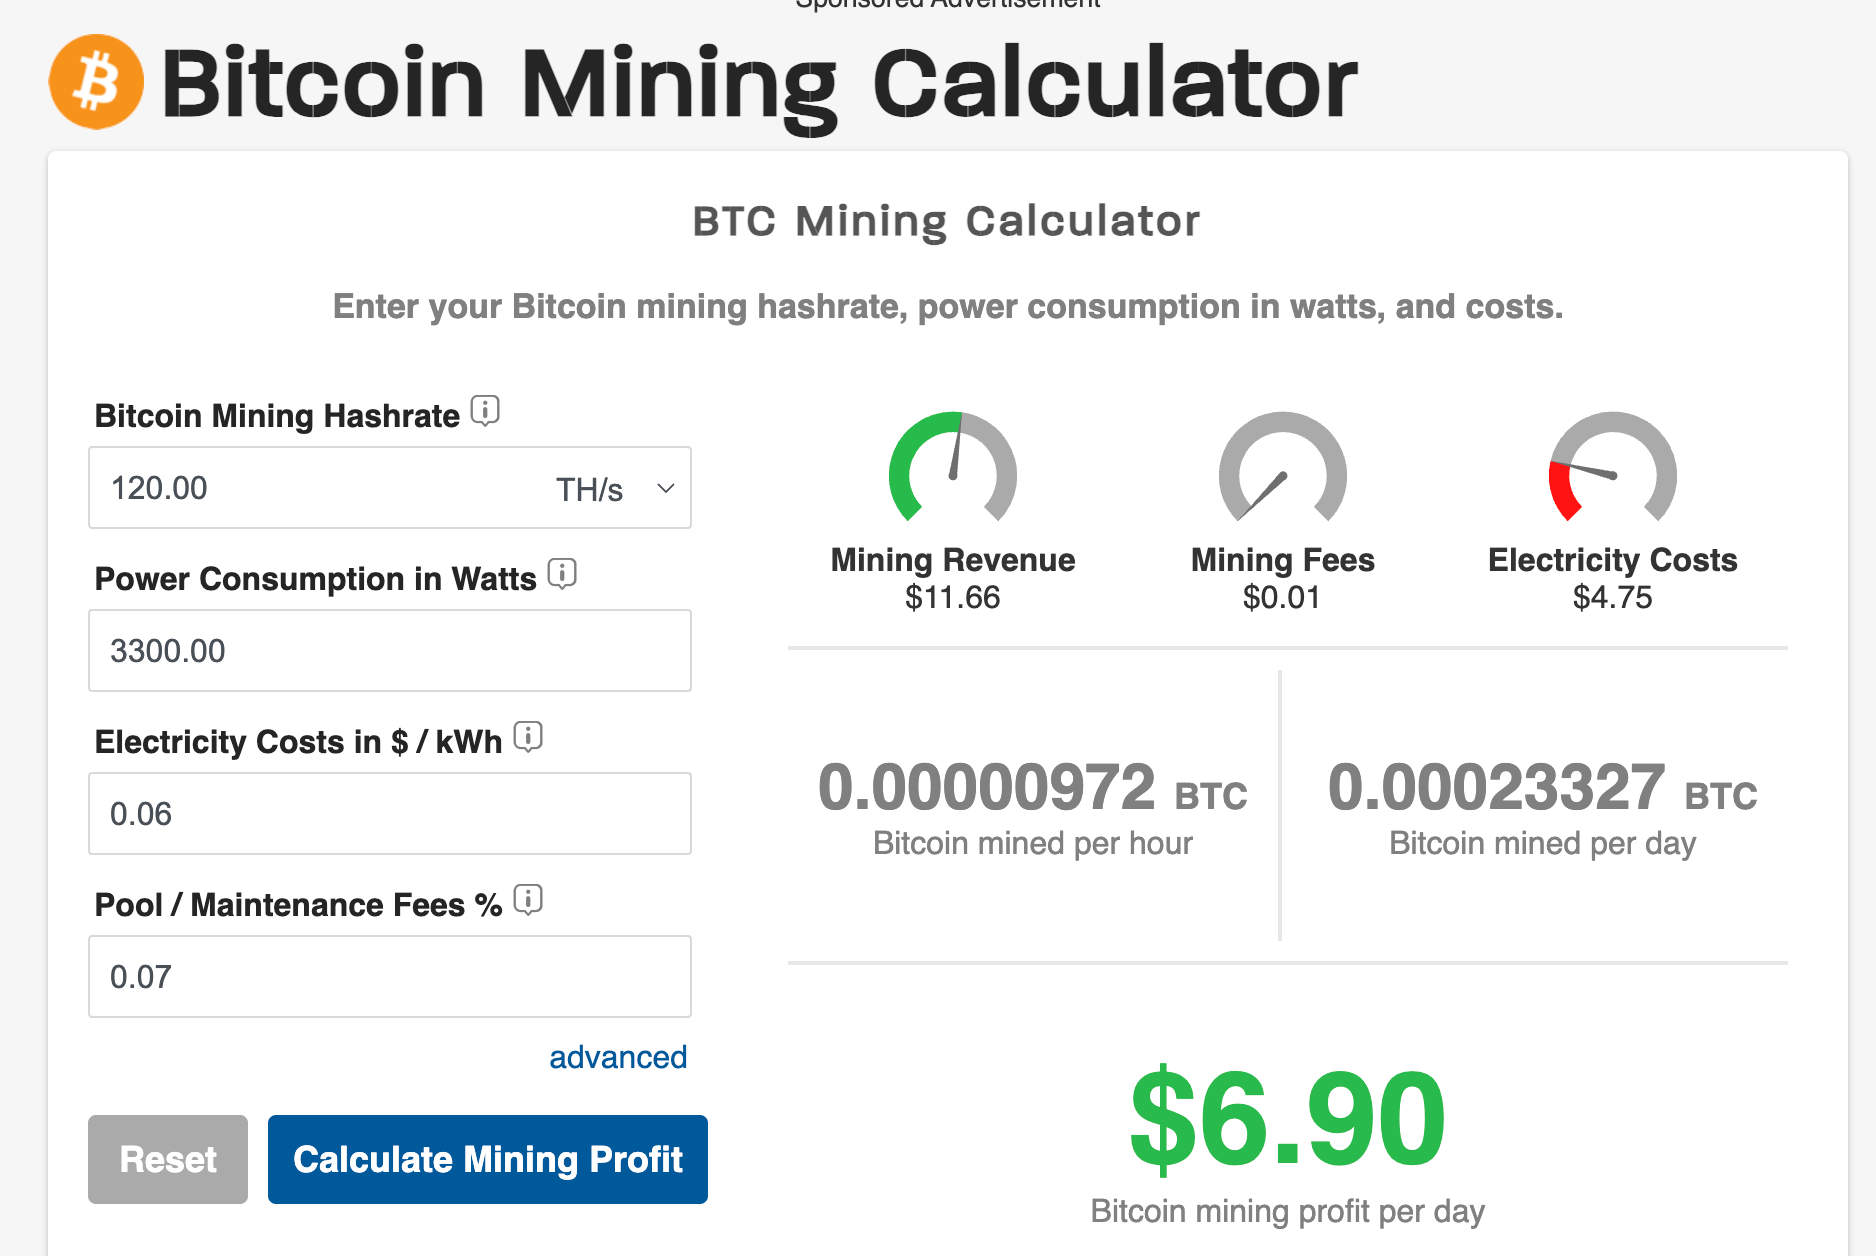 How Long Does It Take to Mine 1 Bitcoin? | CoinCodex